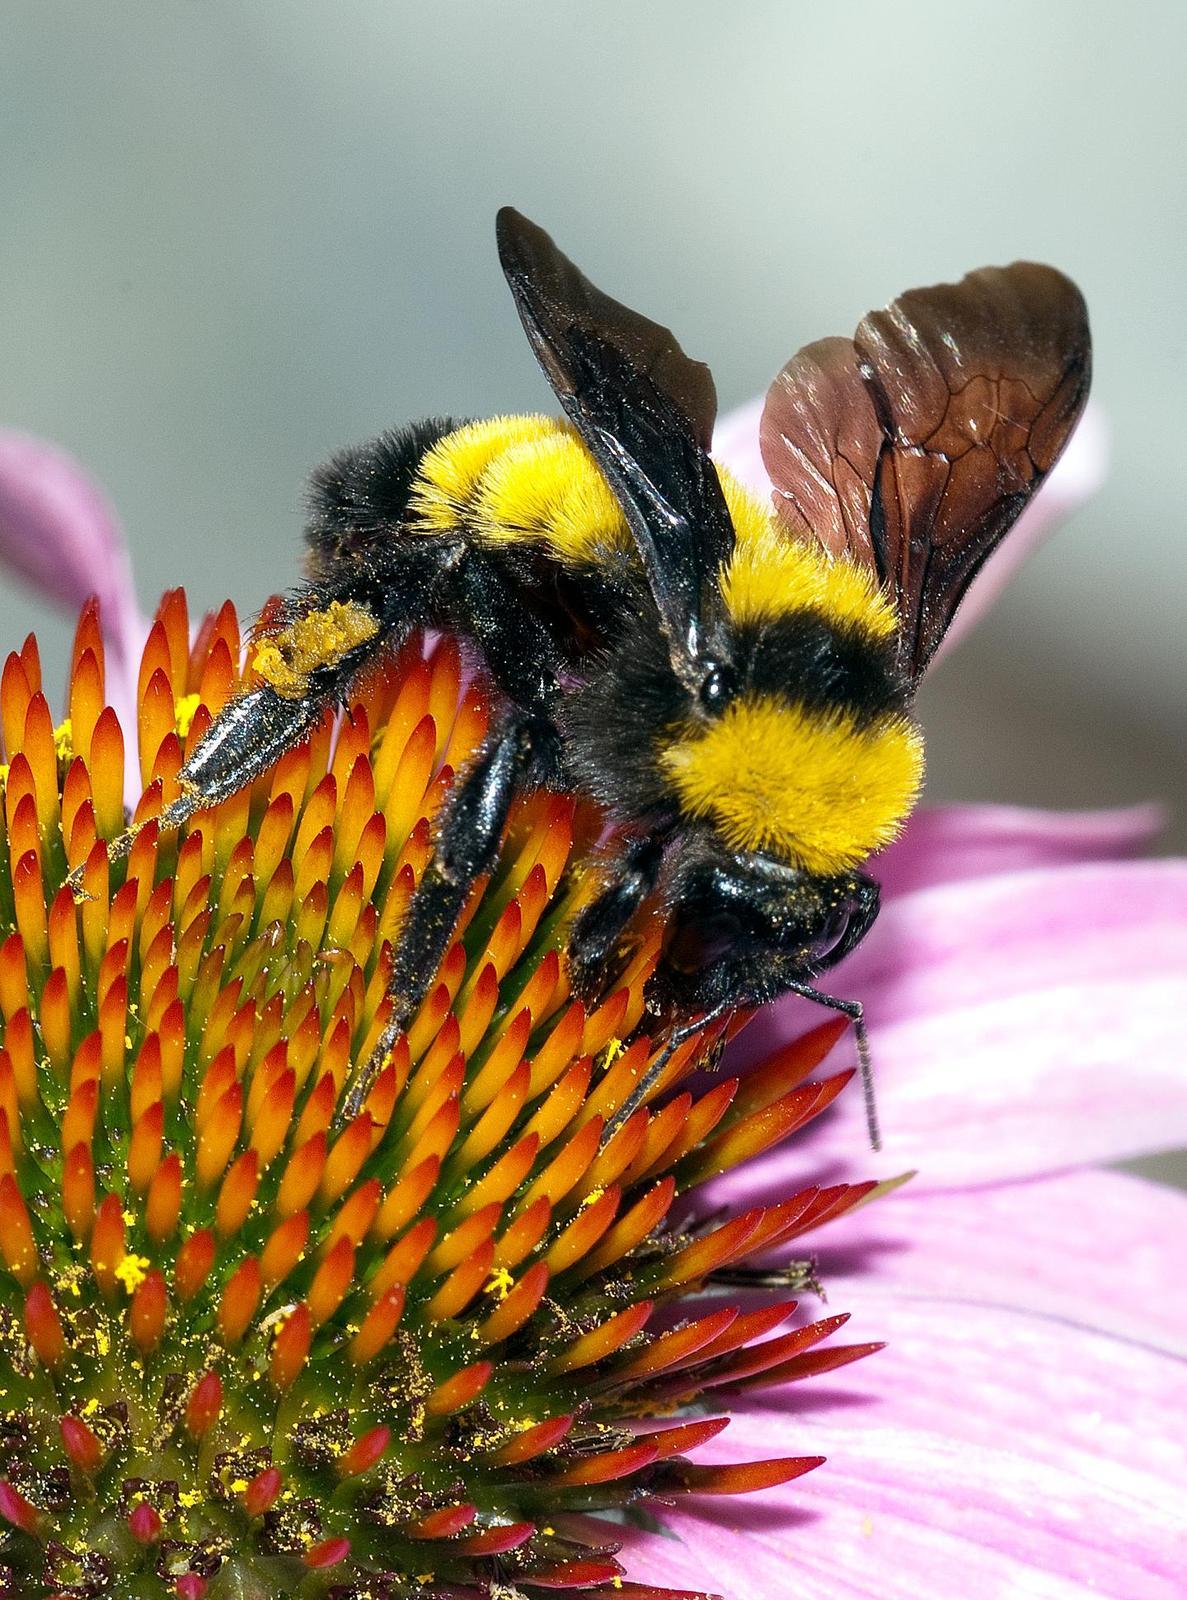 American bumble bee Photo by Robert Behrstock